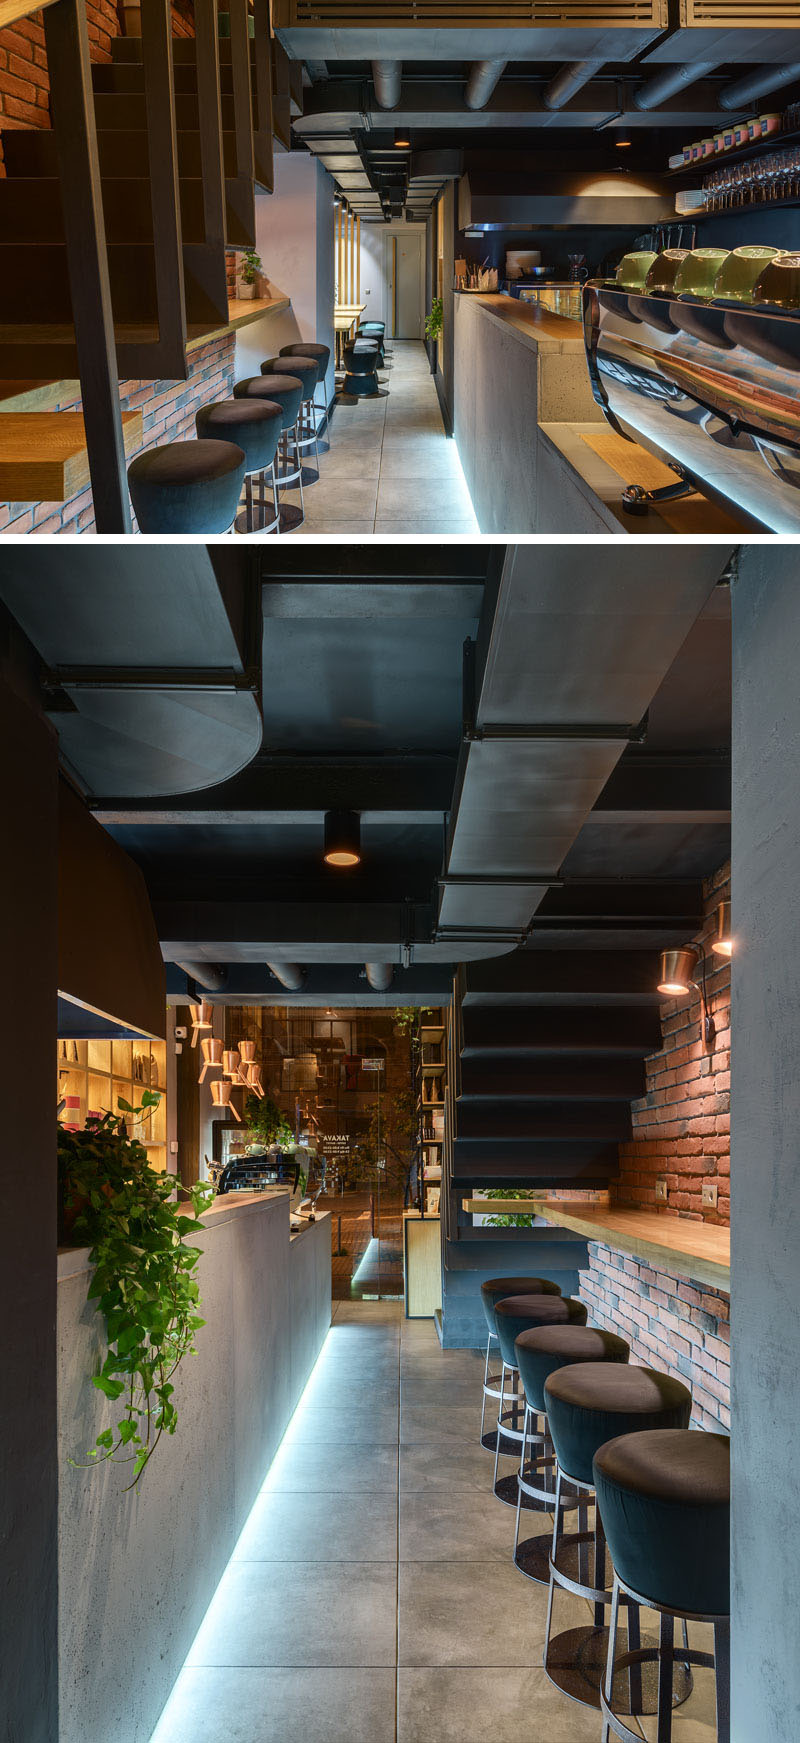 Fall In Love With This Coffee Shop Design With Modern Lighting! 5